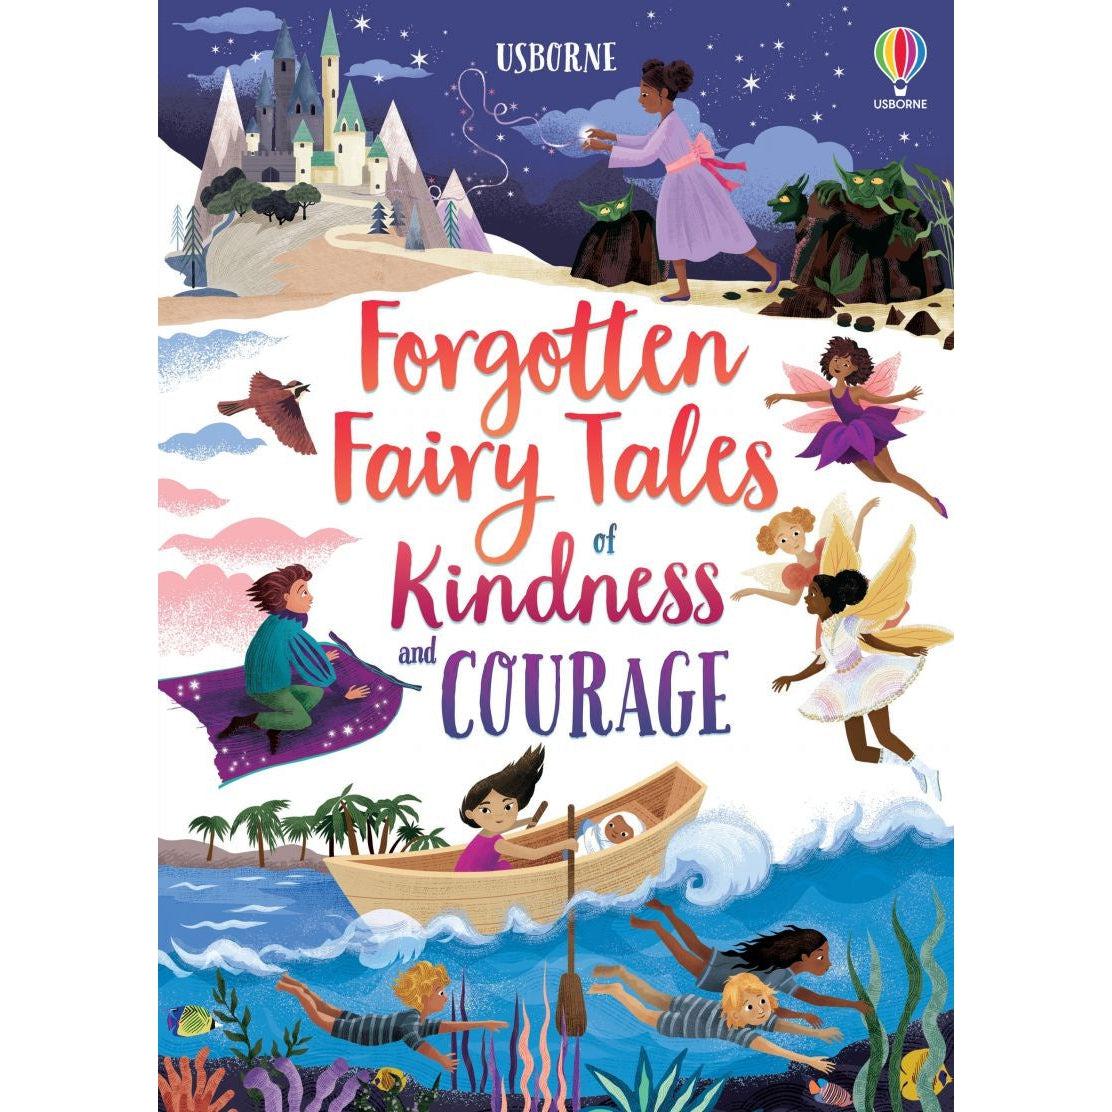 Usborne Books-Forgotten Fairy Tales of Kindness and Courage-551773-Legacy Toys